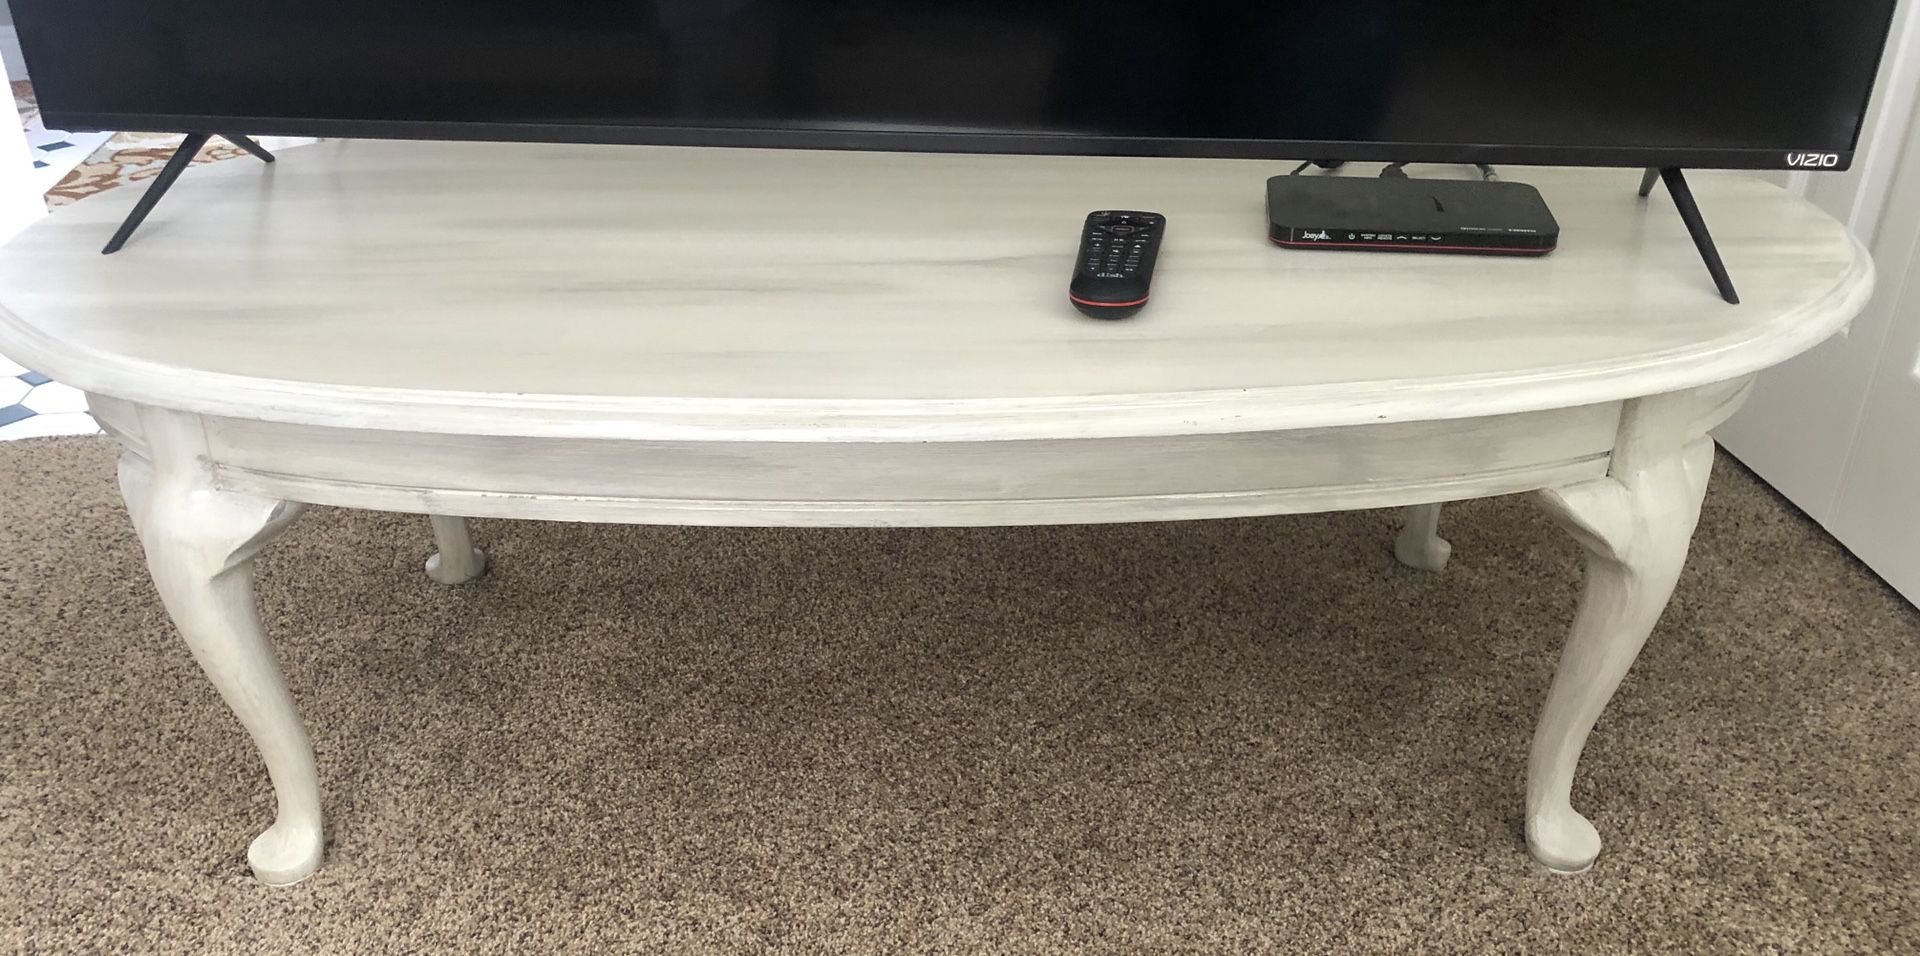 Oval Off White Coffee Table in excellent Condition!